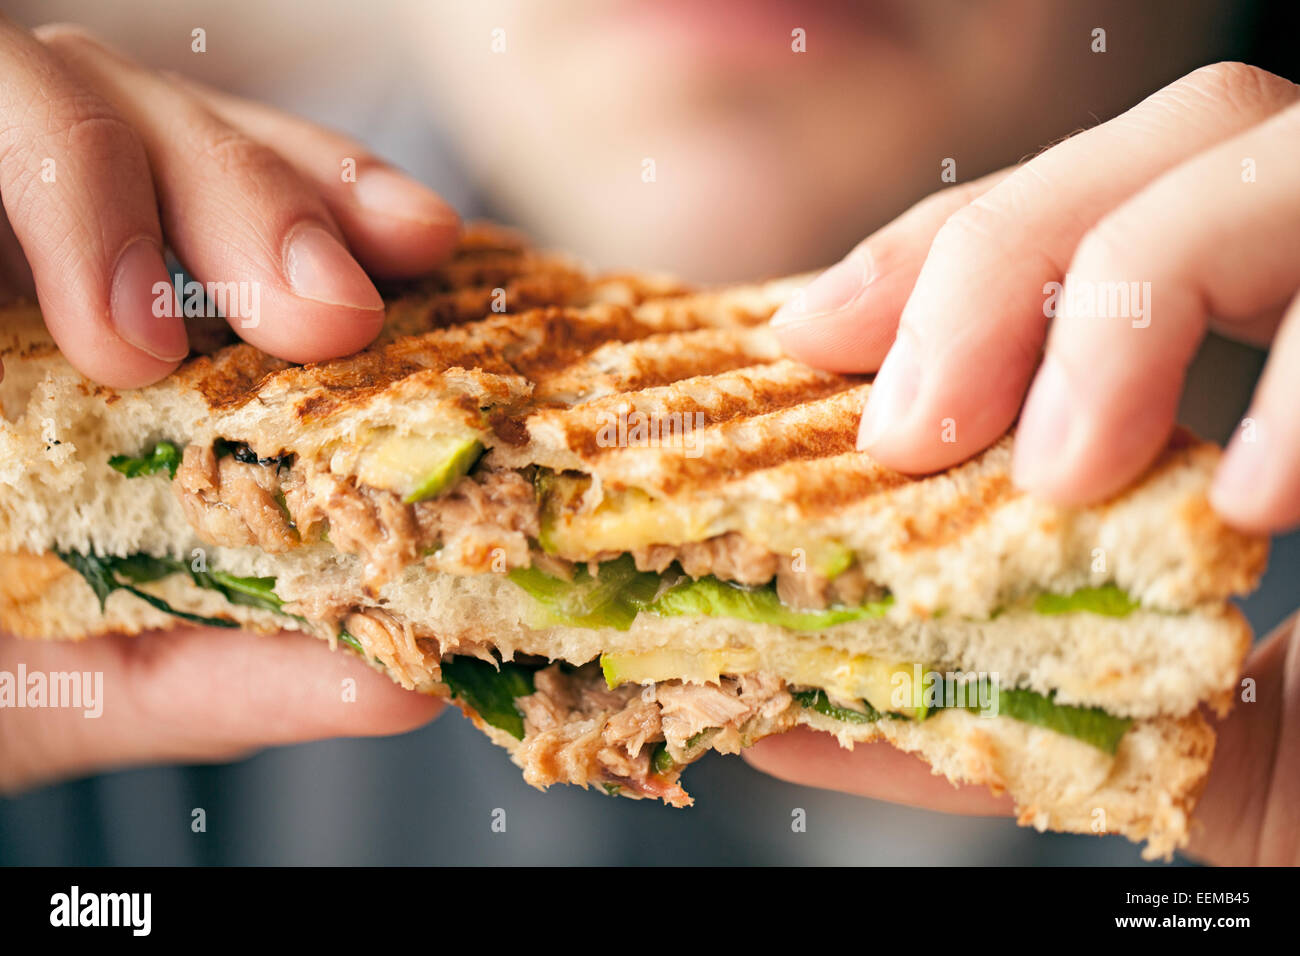 Close up of woman eating sandwich Stock Photo